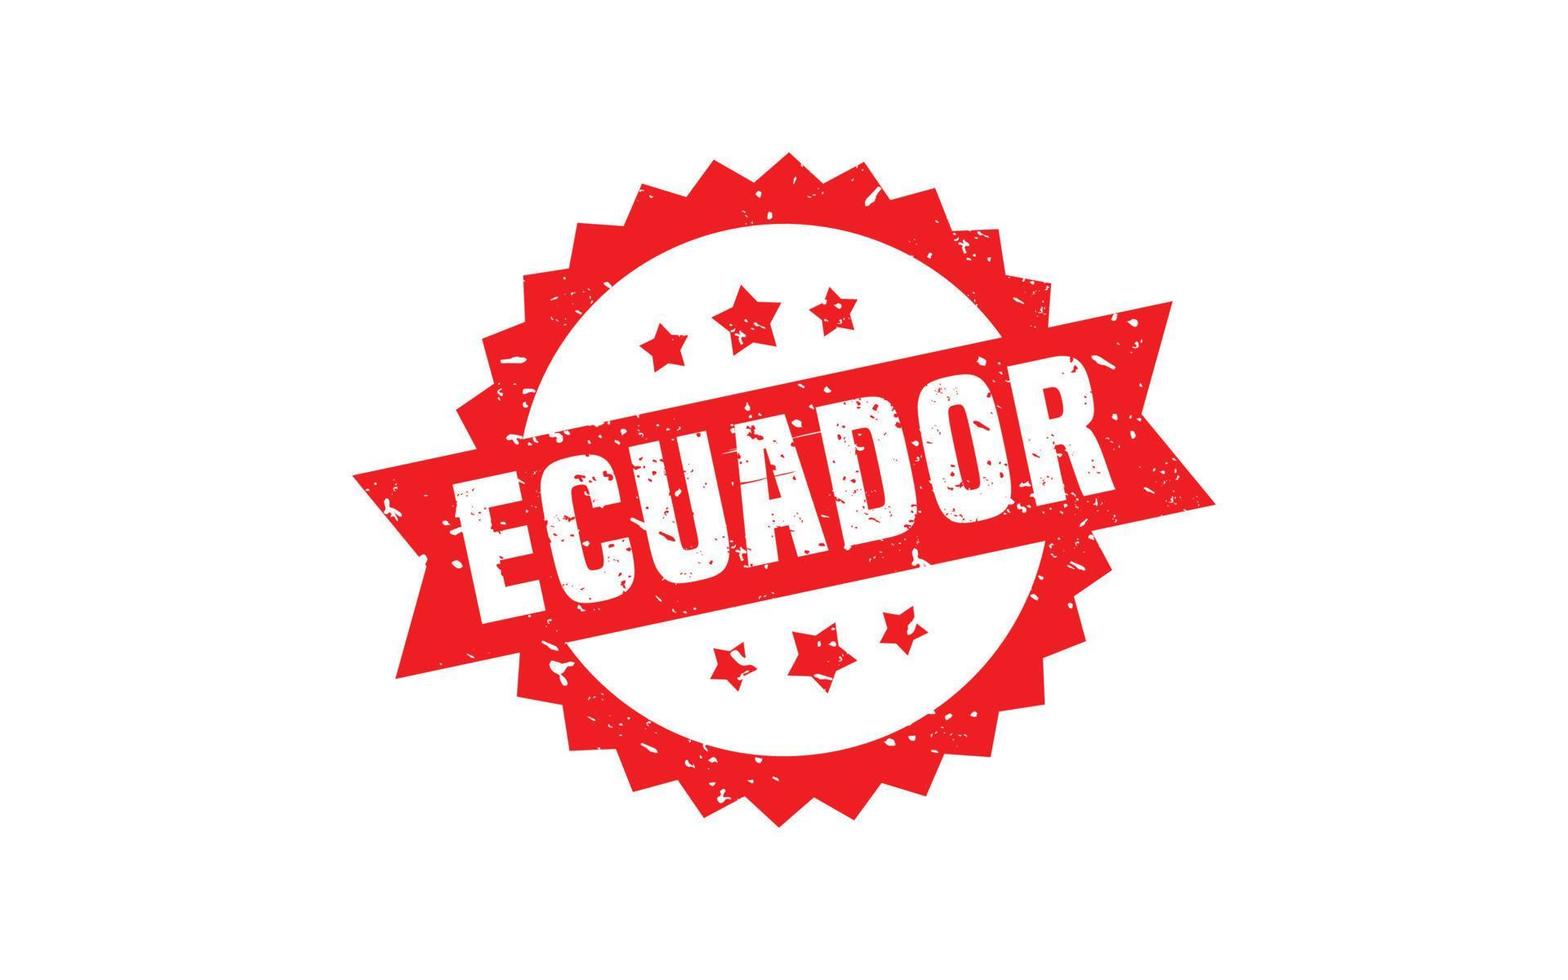 ECUADOR stamp rubber with grunge style on white background vector